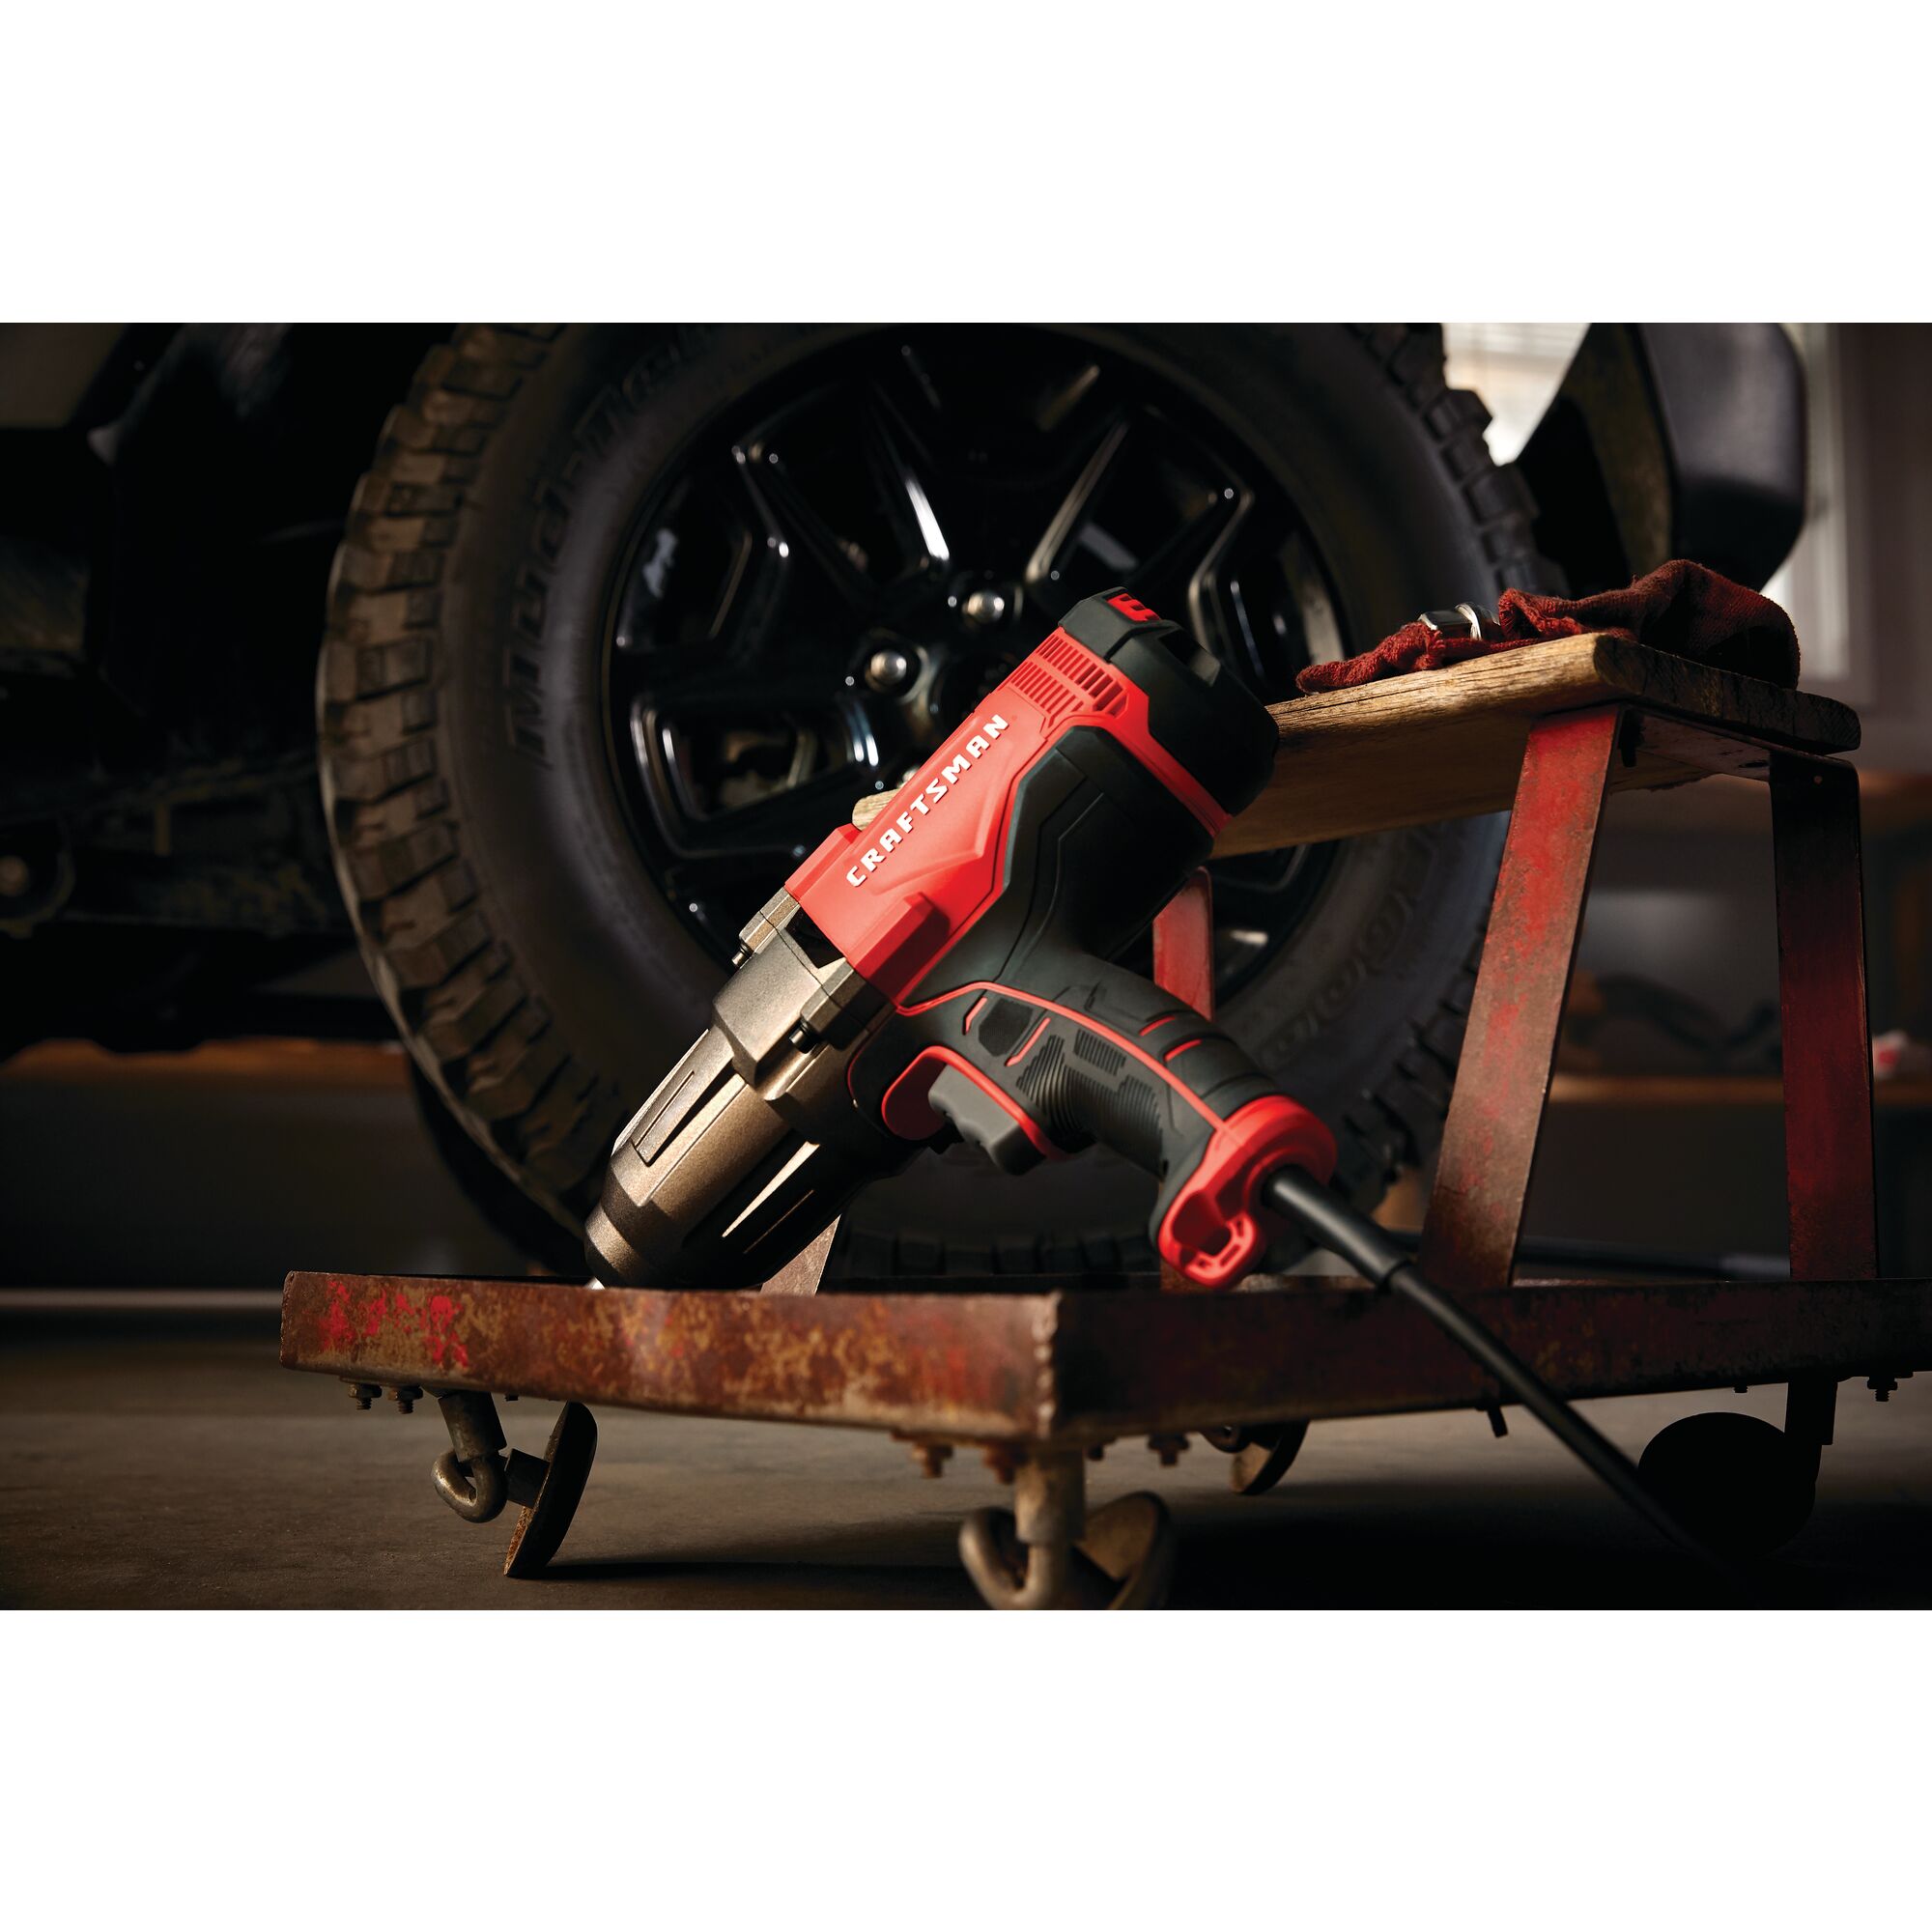 7.5 Amp 1/2-in. Impact Wrench | CRAFTSMAN